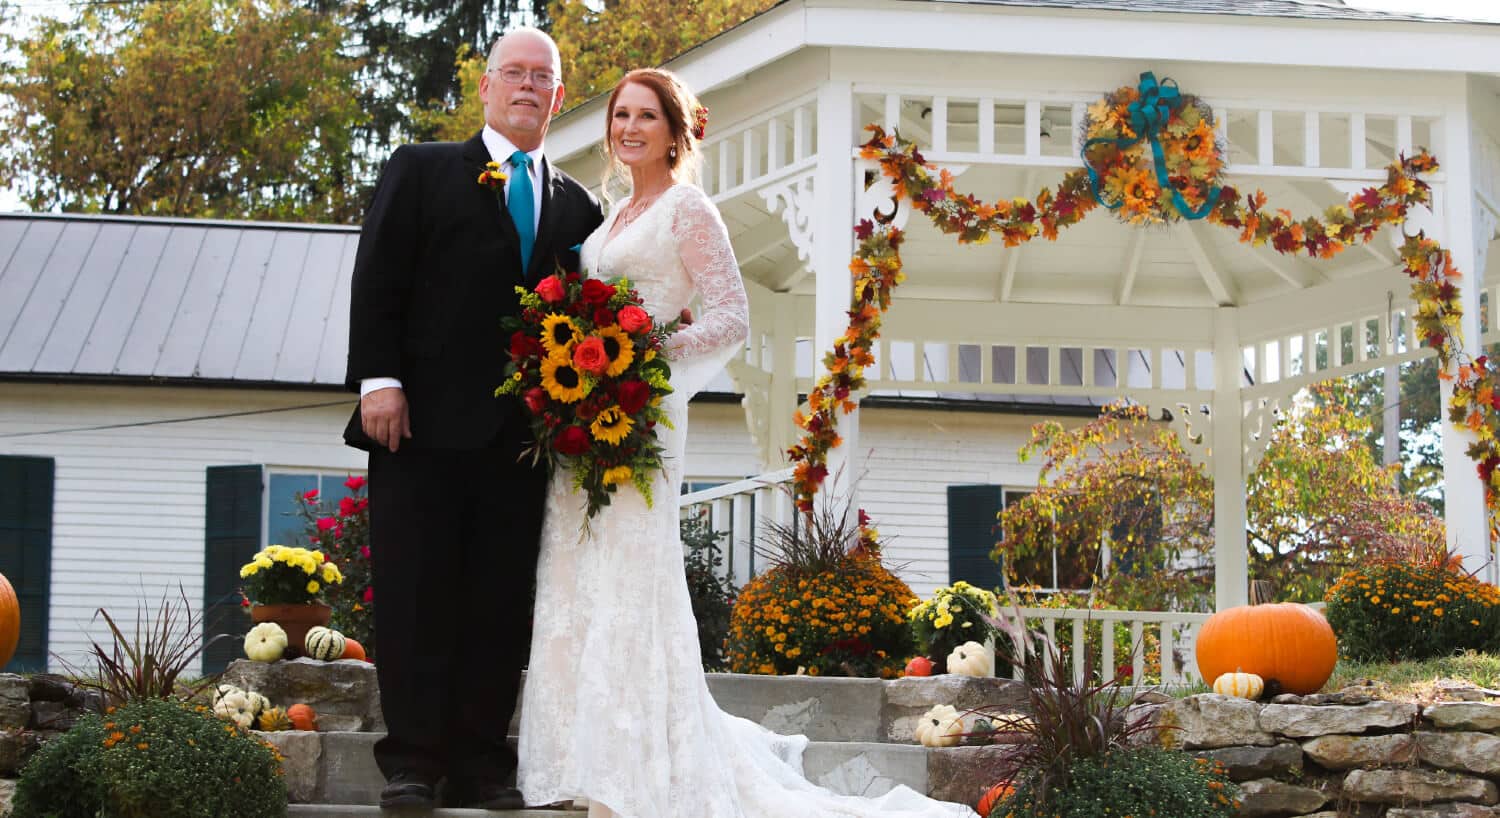 bride holding bouquet with fall flowers and groom standing by white gazebo with draping fall flowers house with green shutters in distance